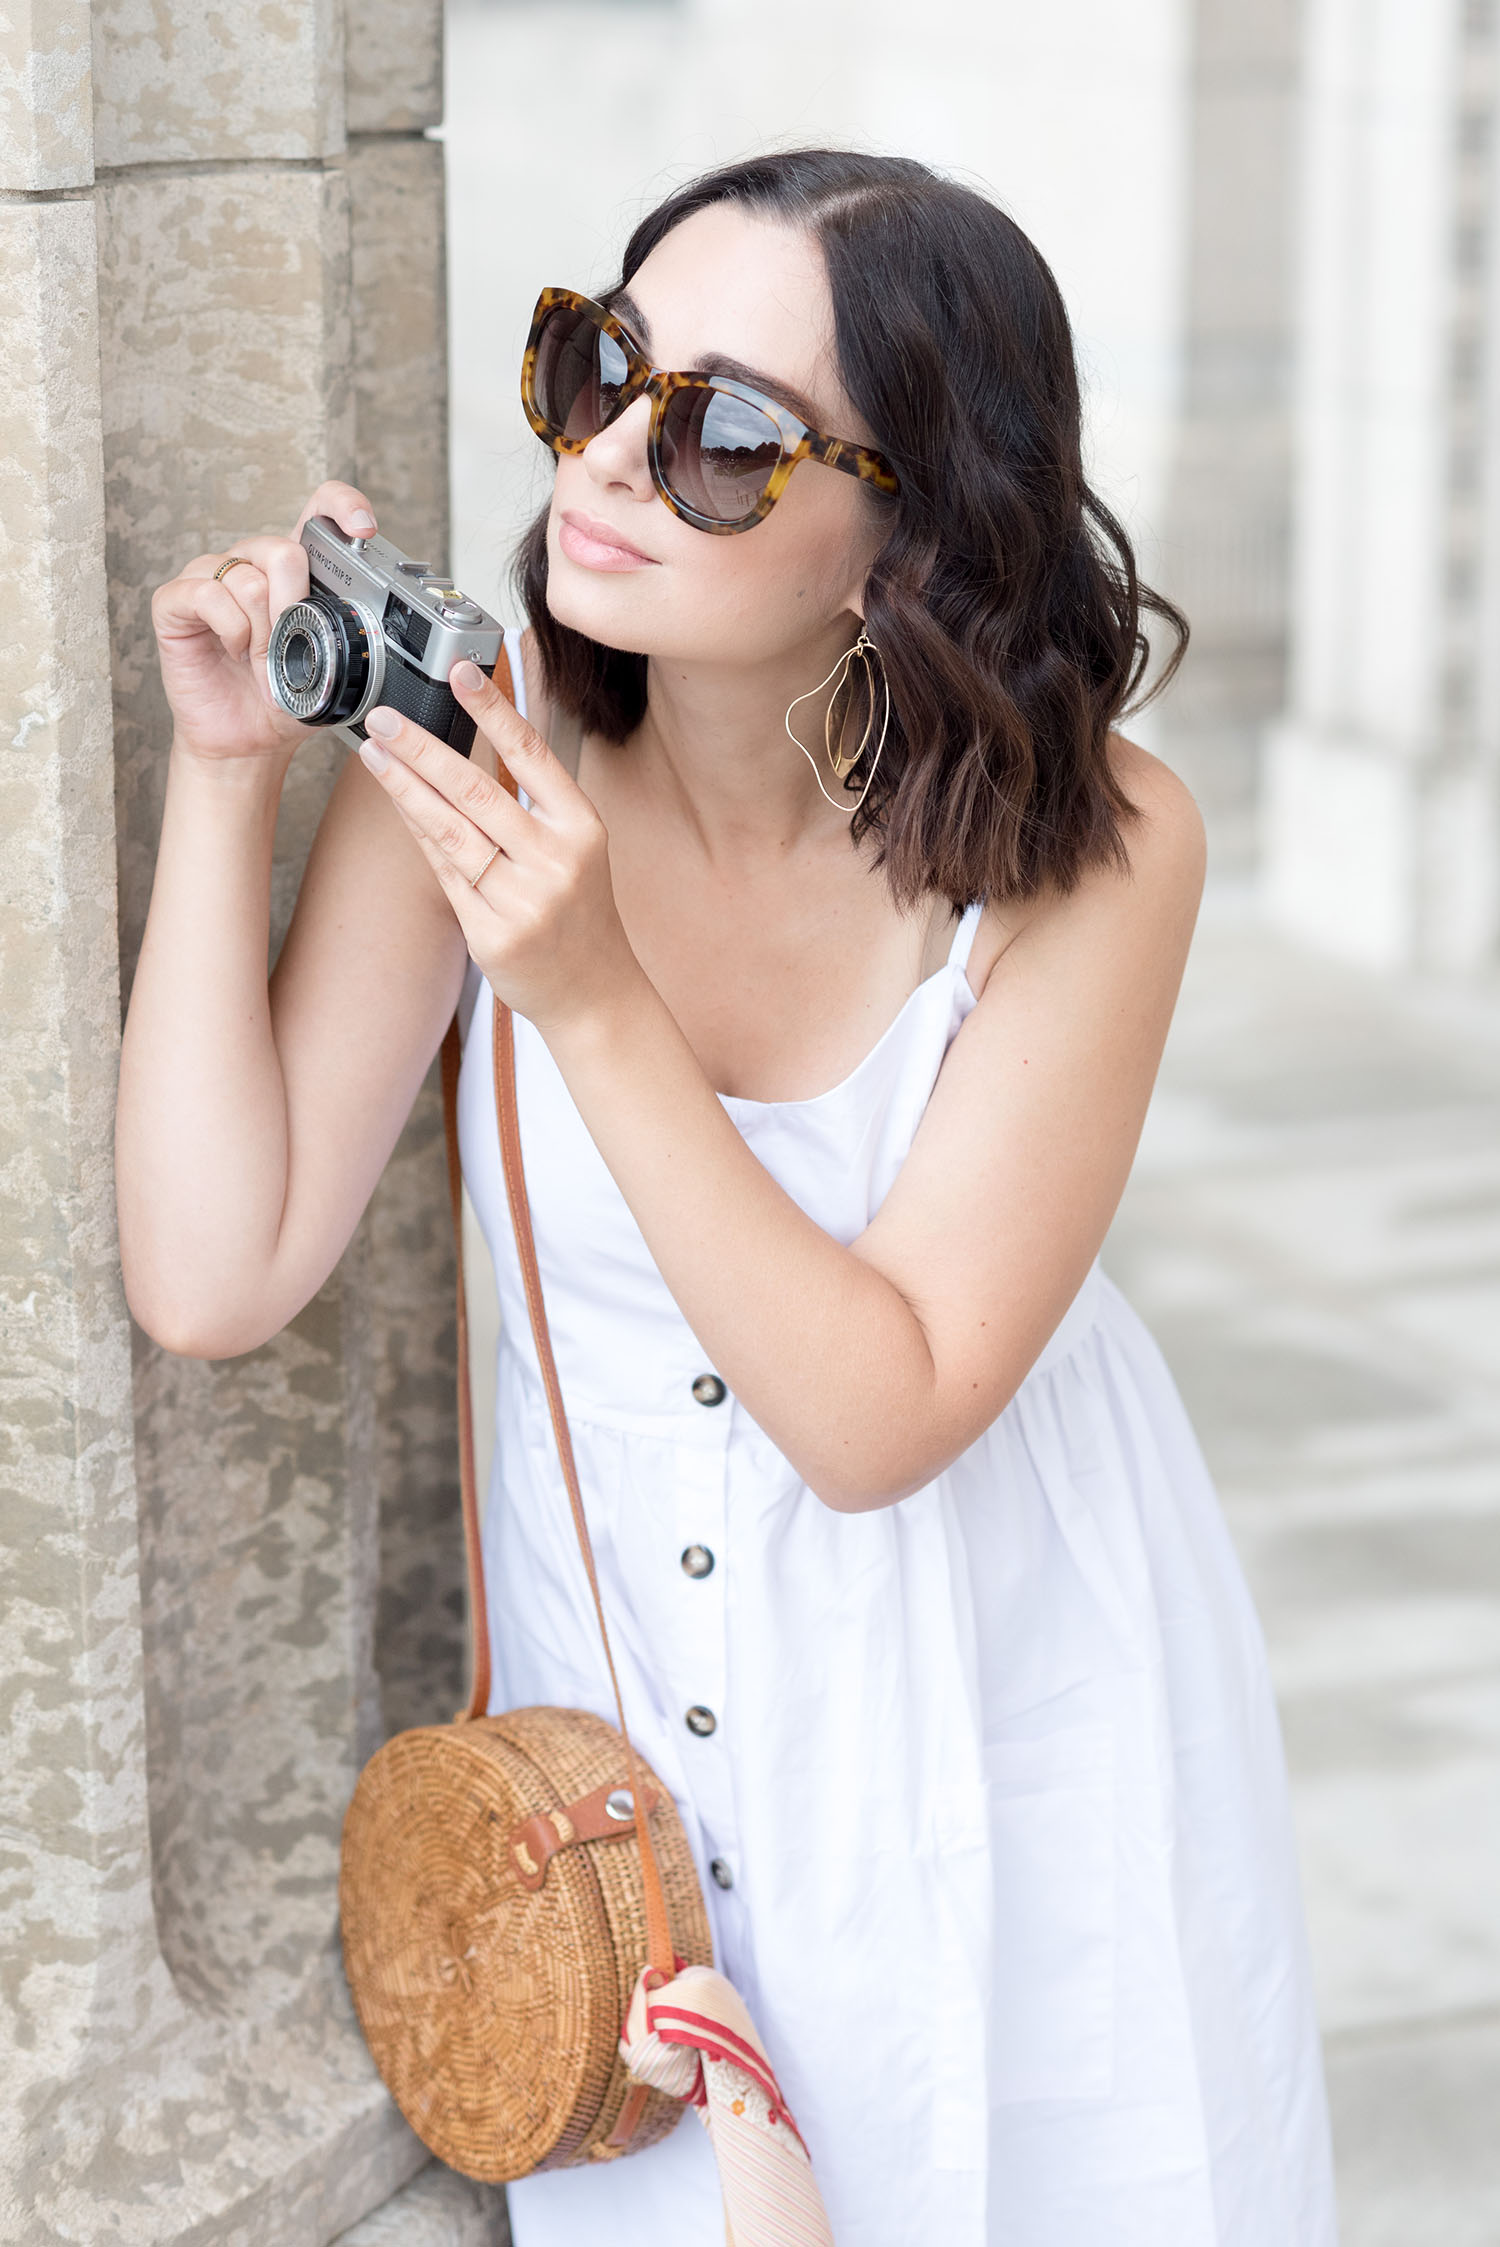 Top Canadian fashion blogger Cee Fardoe of Coco & Vera takes a picture on a vintage Olympus camera wearing Anine Bing Los Angeles sunglasses